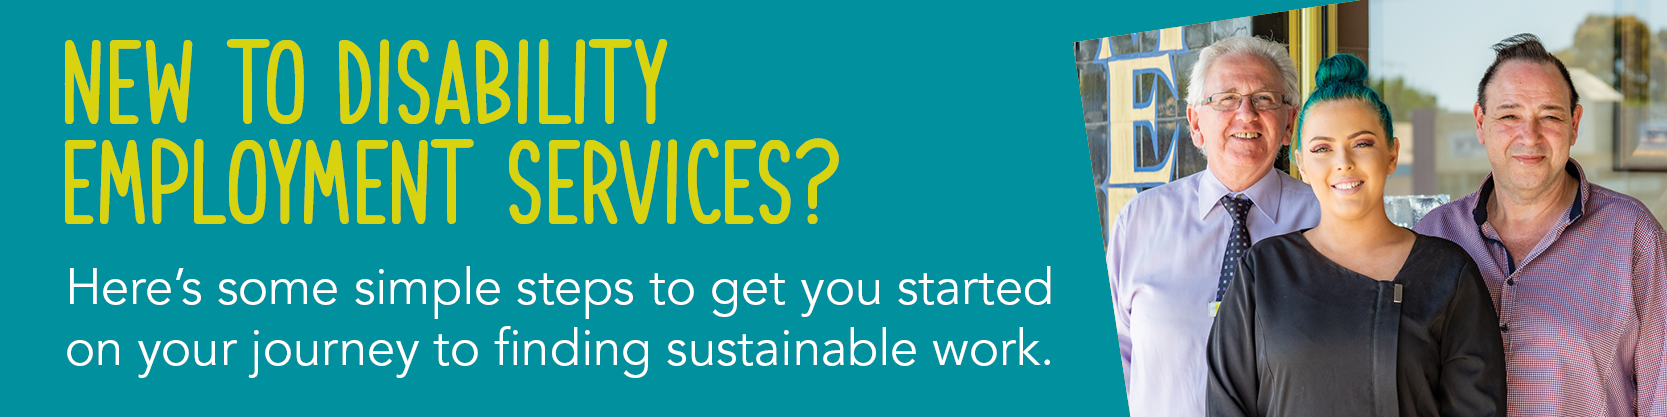 Copy: New to Disability Employment Services? Here’s some simple steps to get you started on your journey to finding sustainable work. Image of three people smiling. 